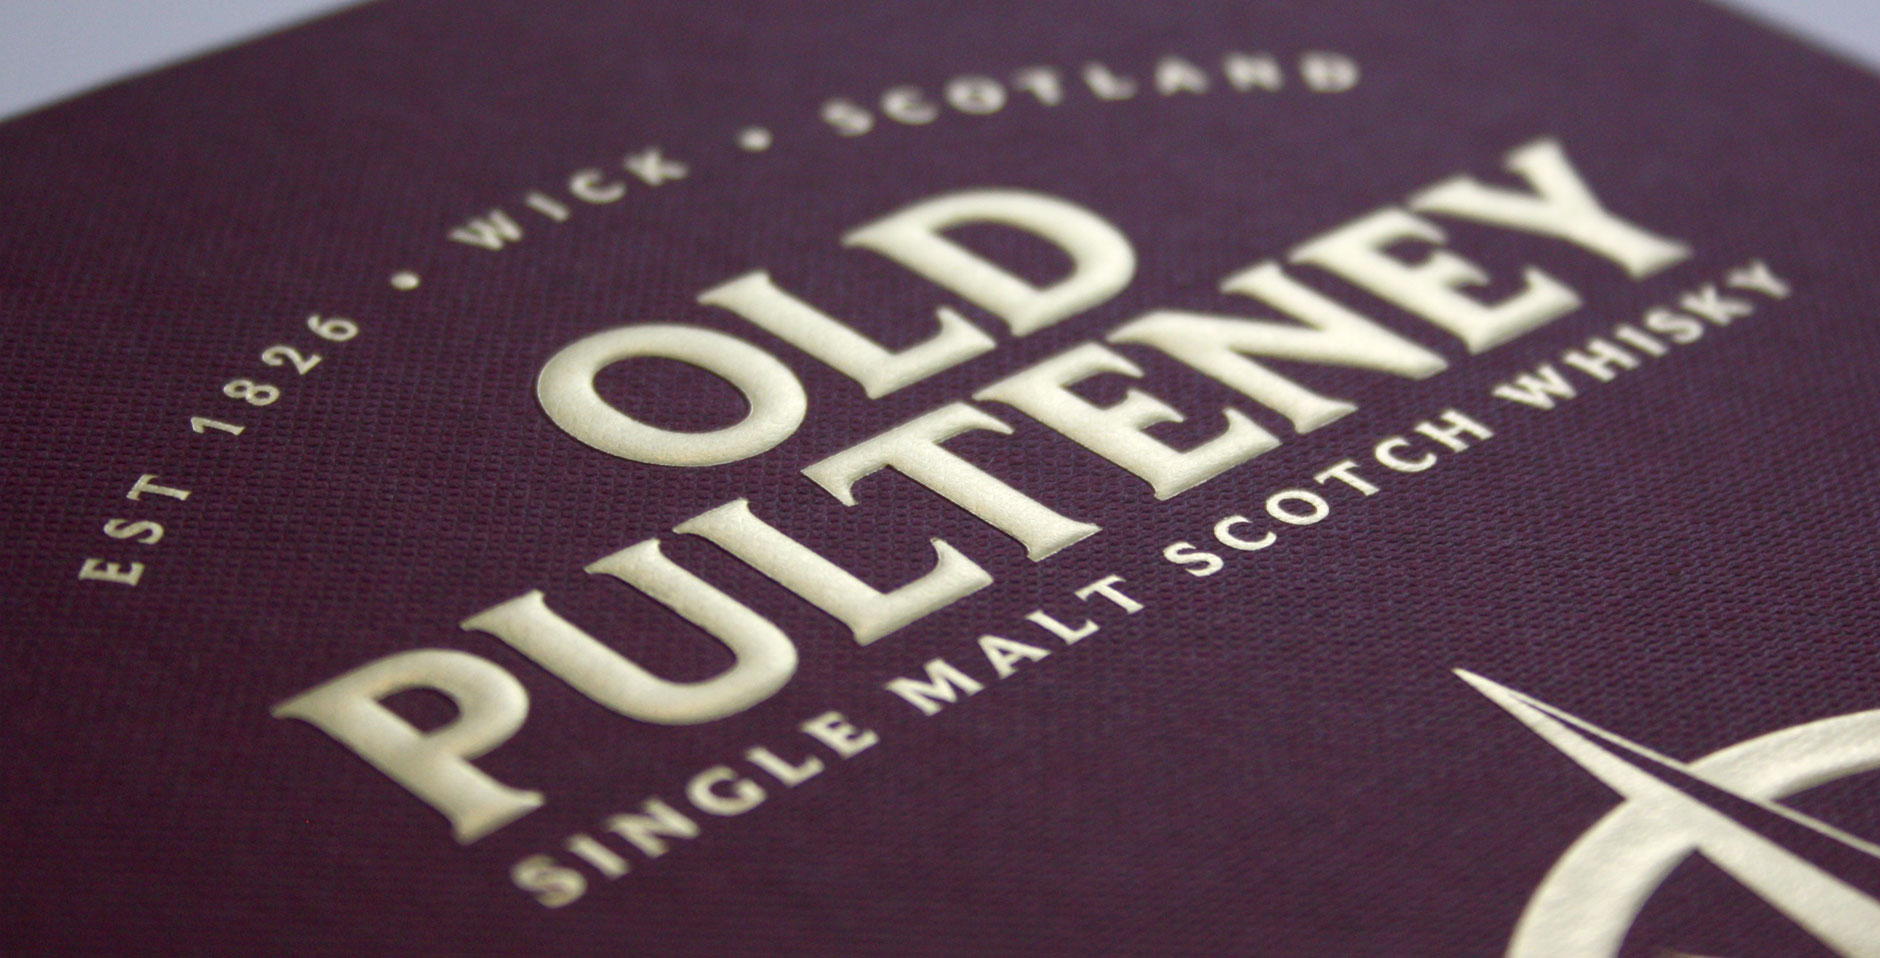 Old Pulteney Packaging Detail